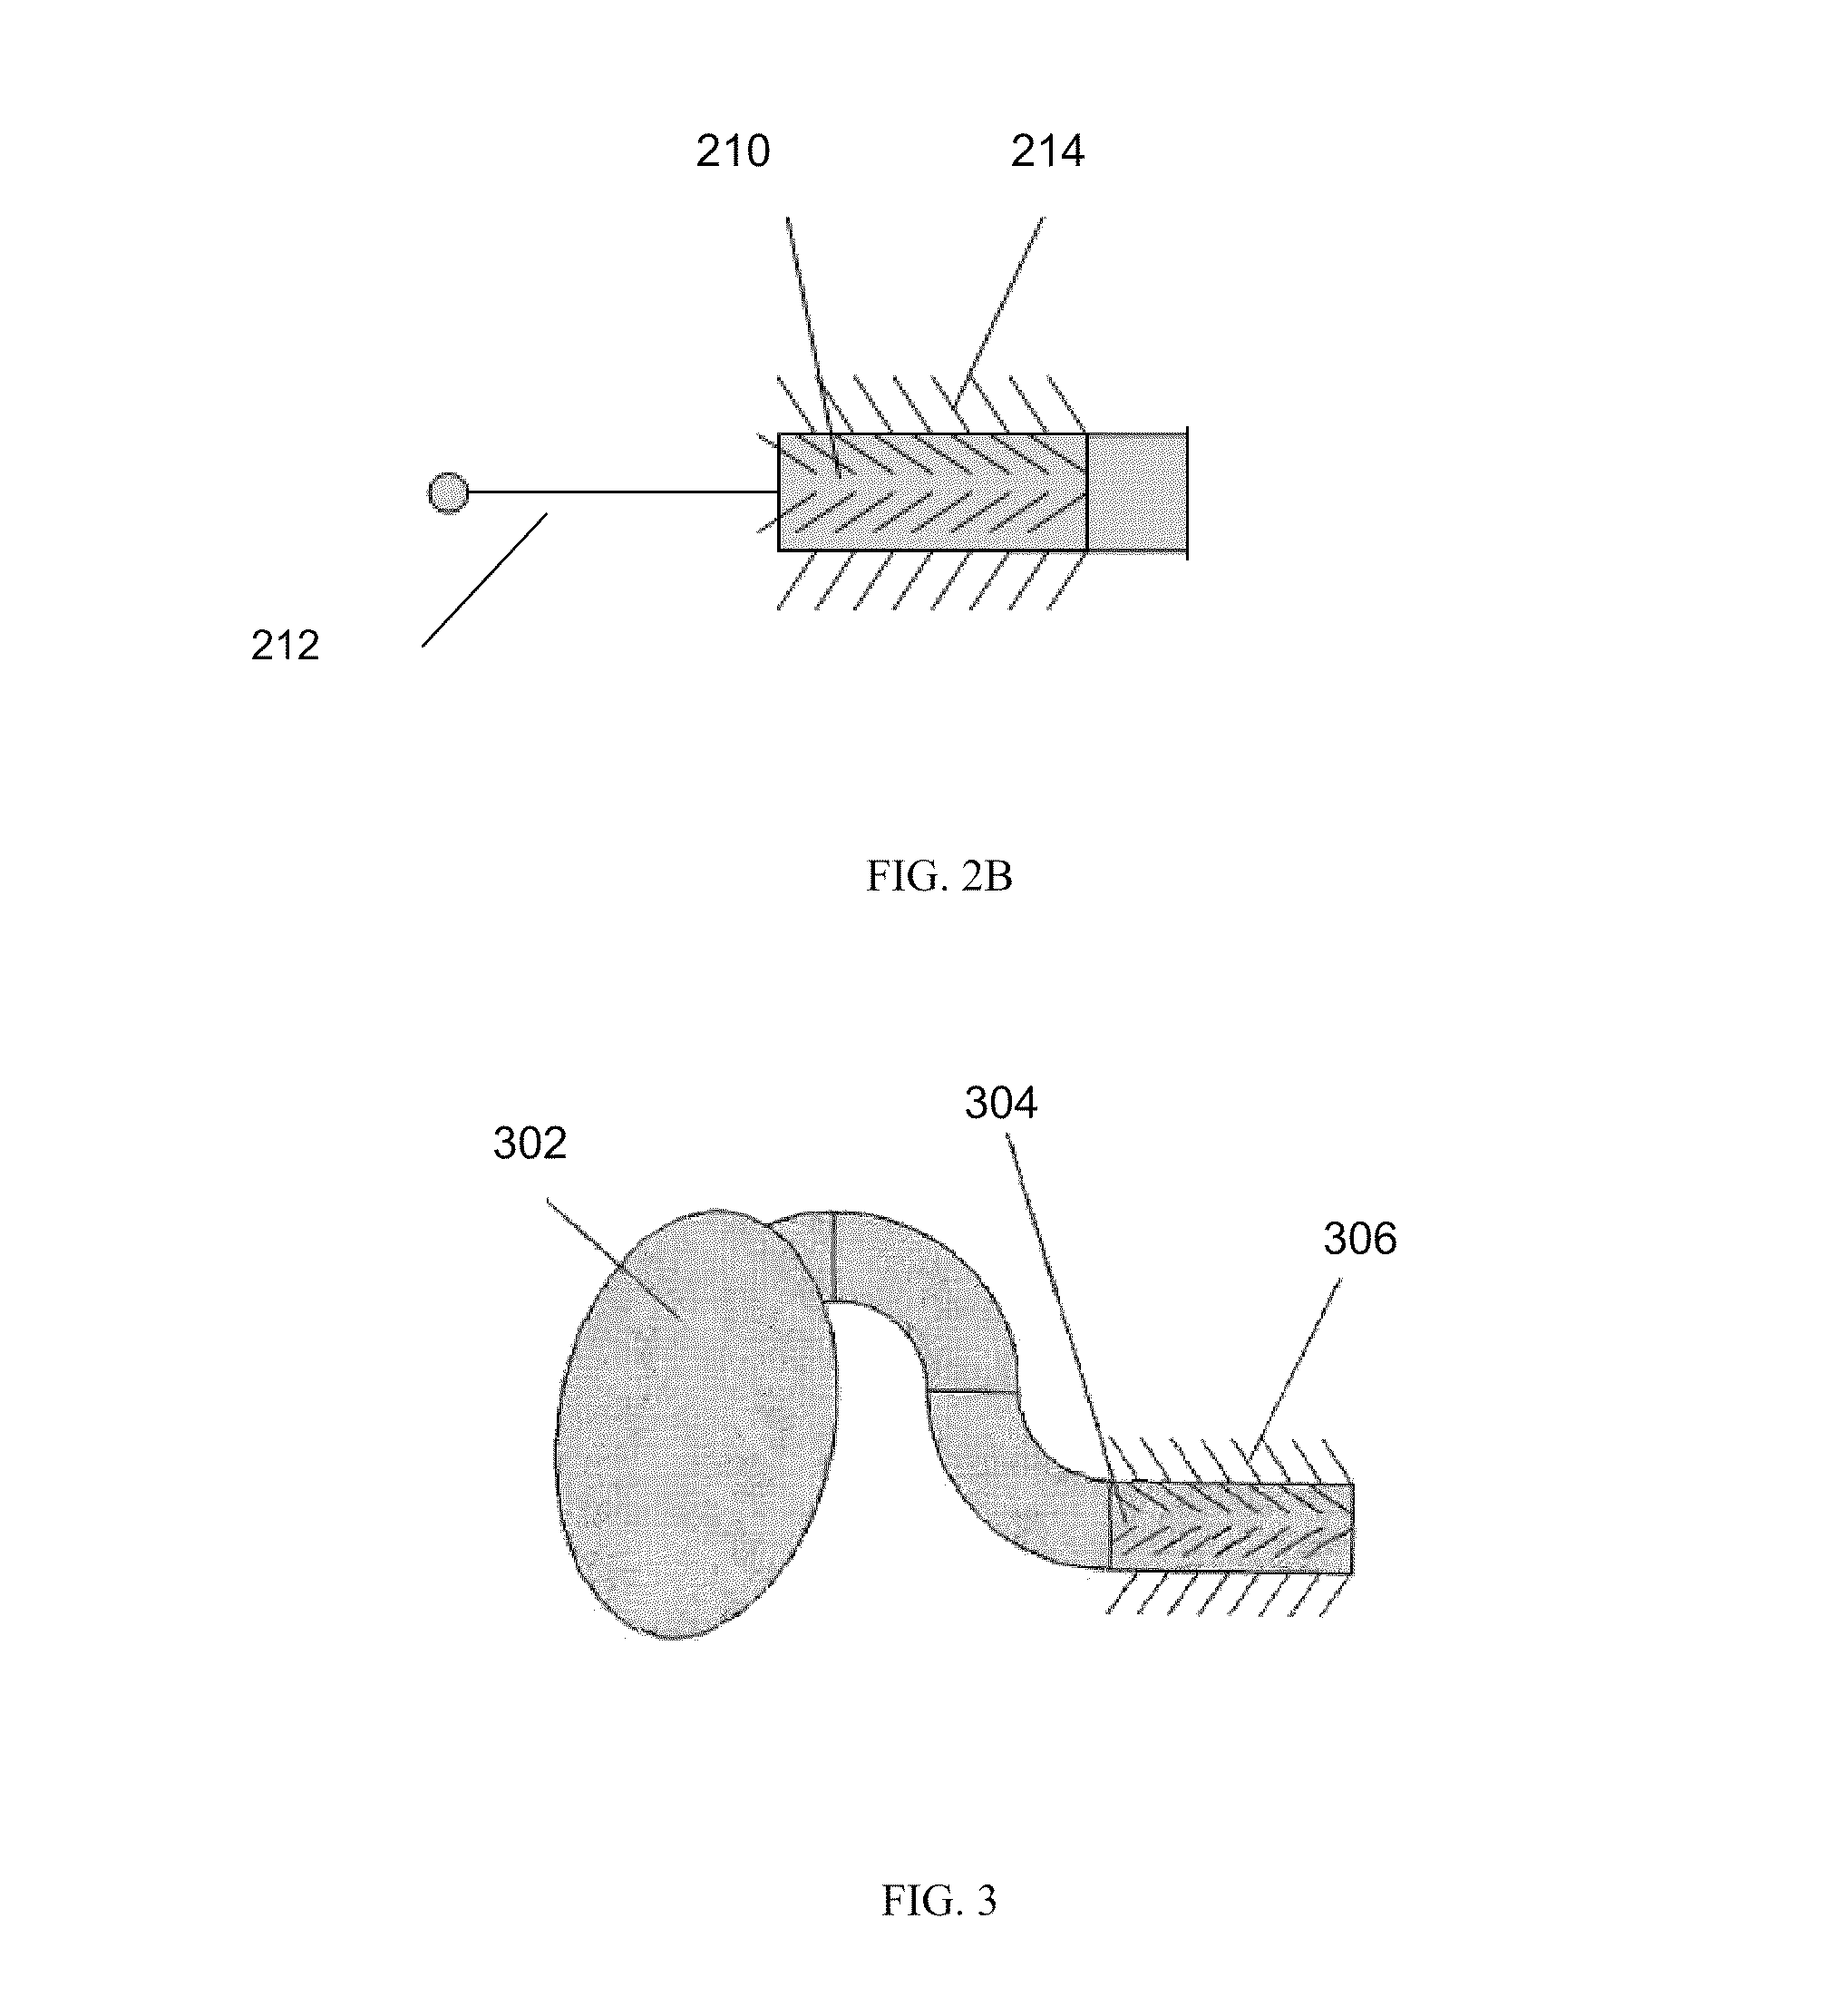 Open ear canal hearing aid with adjustable non-occluding securing mechanism